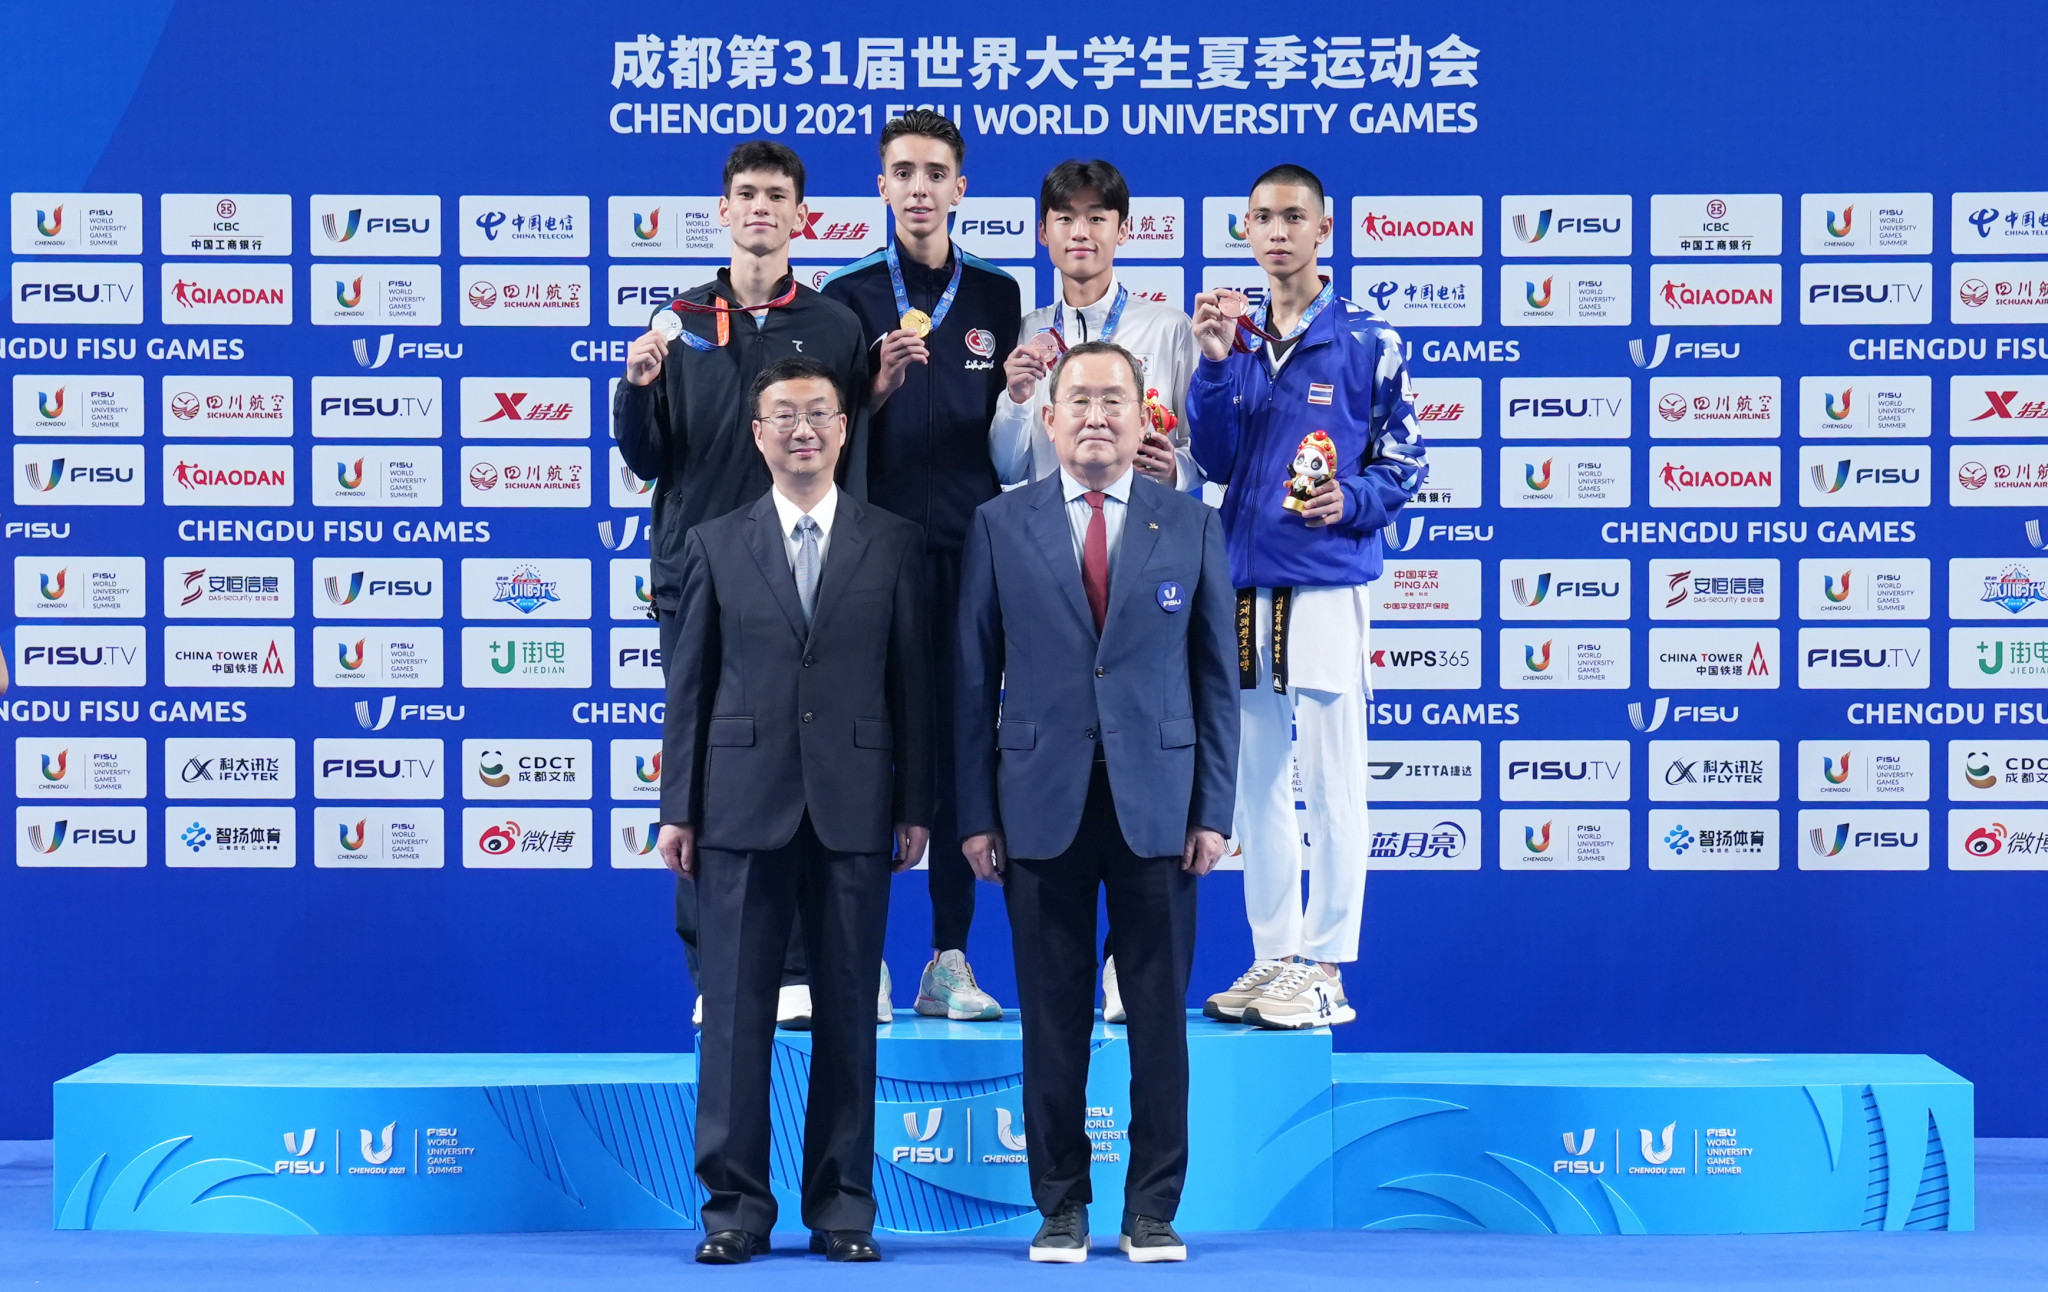 The medal ceremony for the men's 54kg taekwondo competition ©FISU 